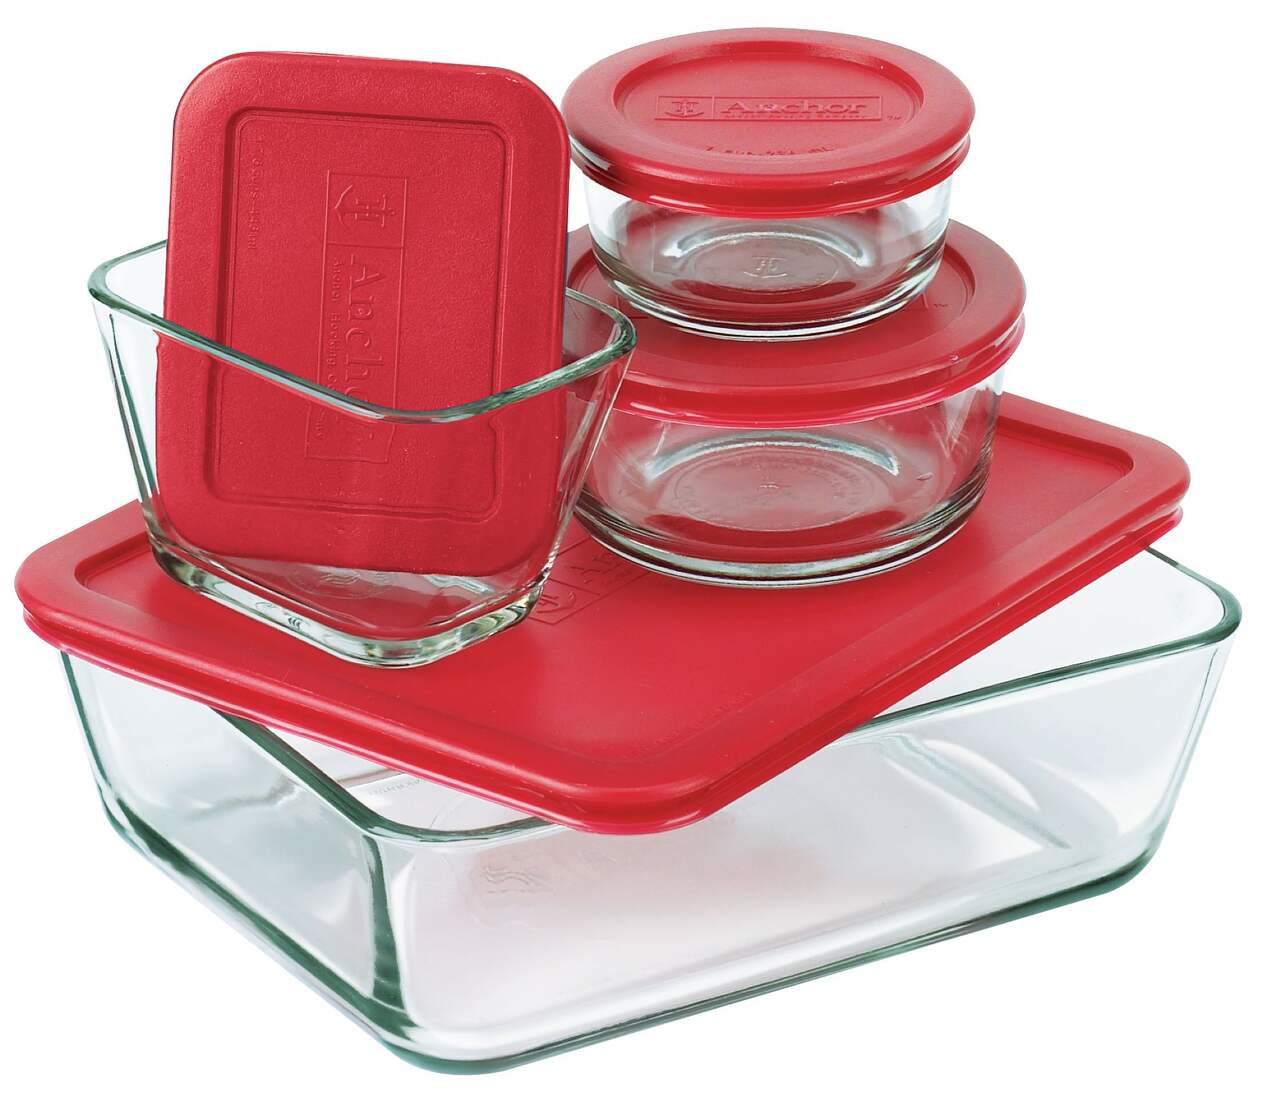 Anchor Hocking Glass Measuring Cup Set, Assorted Sizes, 3-pc